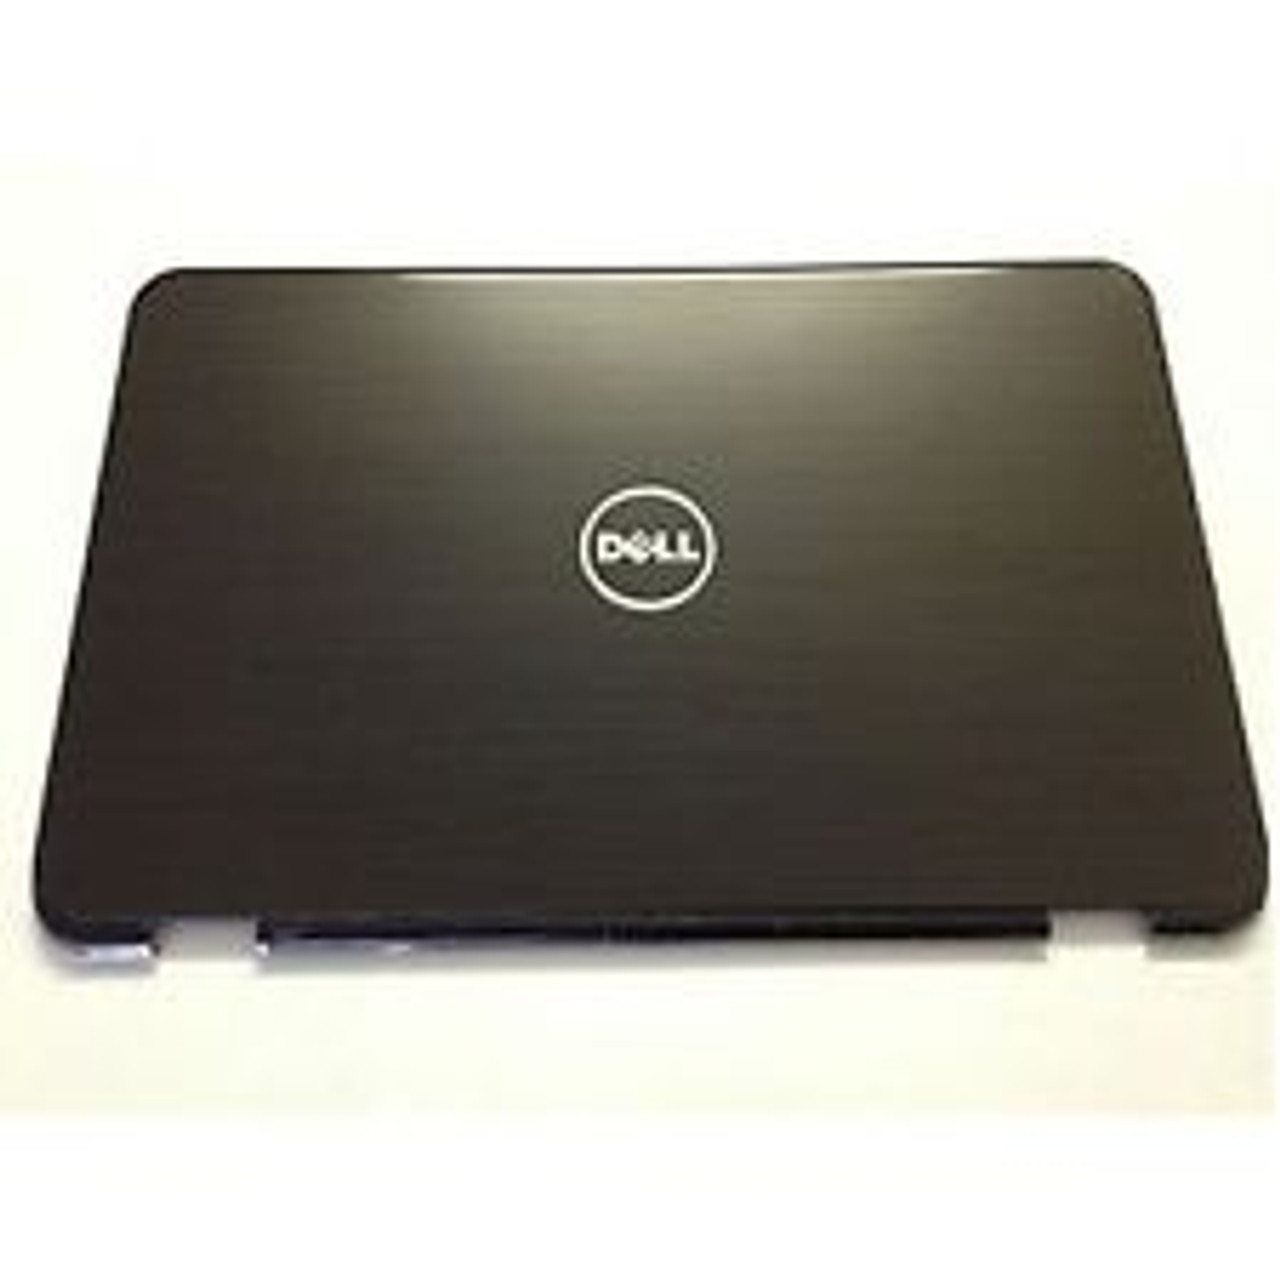 Dell Inspiron N5110 15.6" LCD Back Cover Lid Top - PT35F